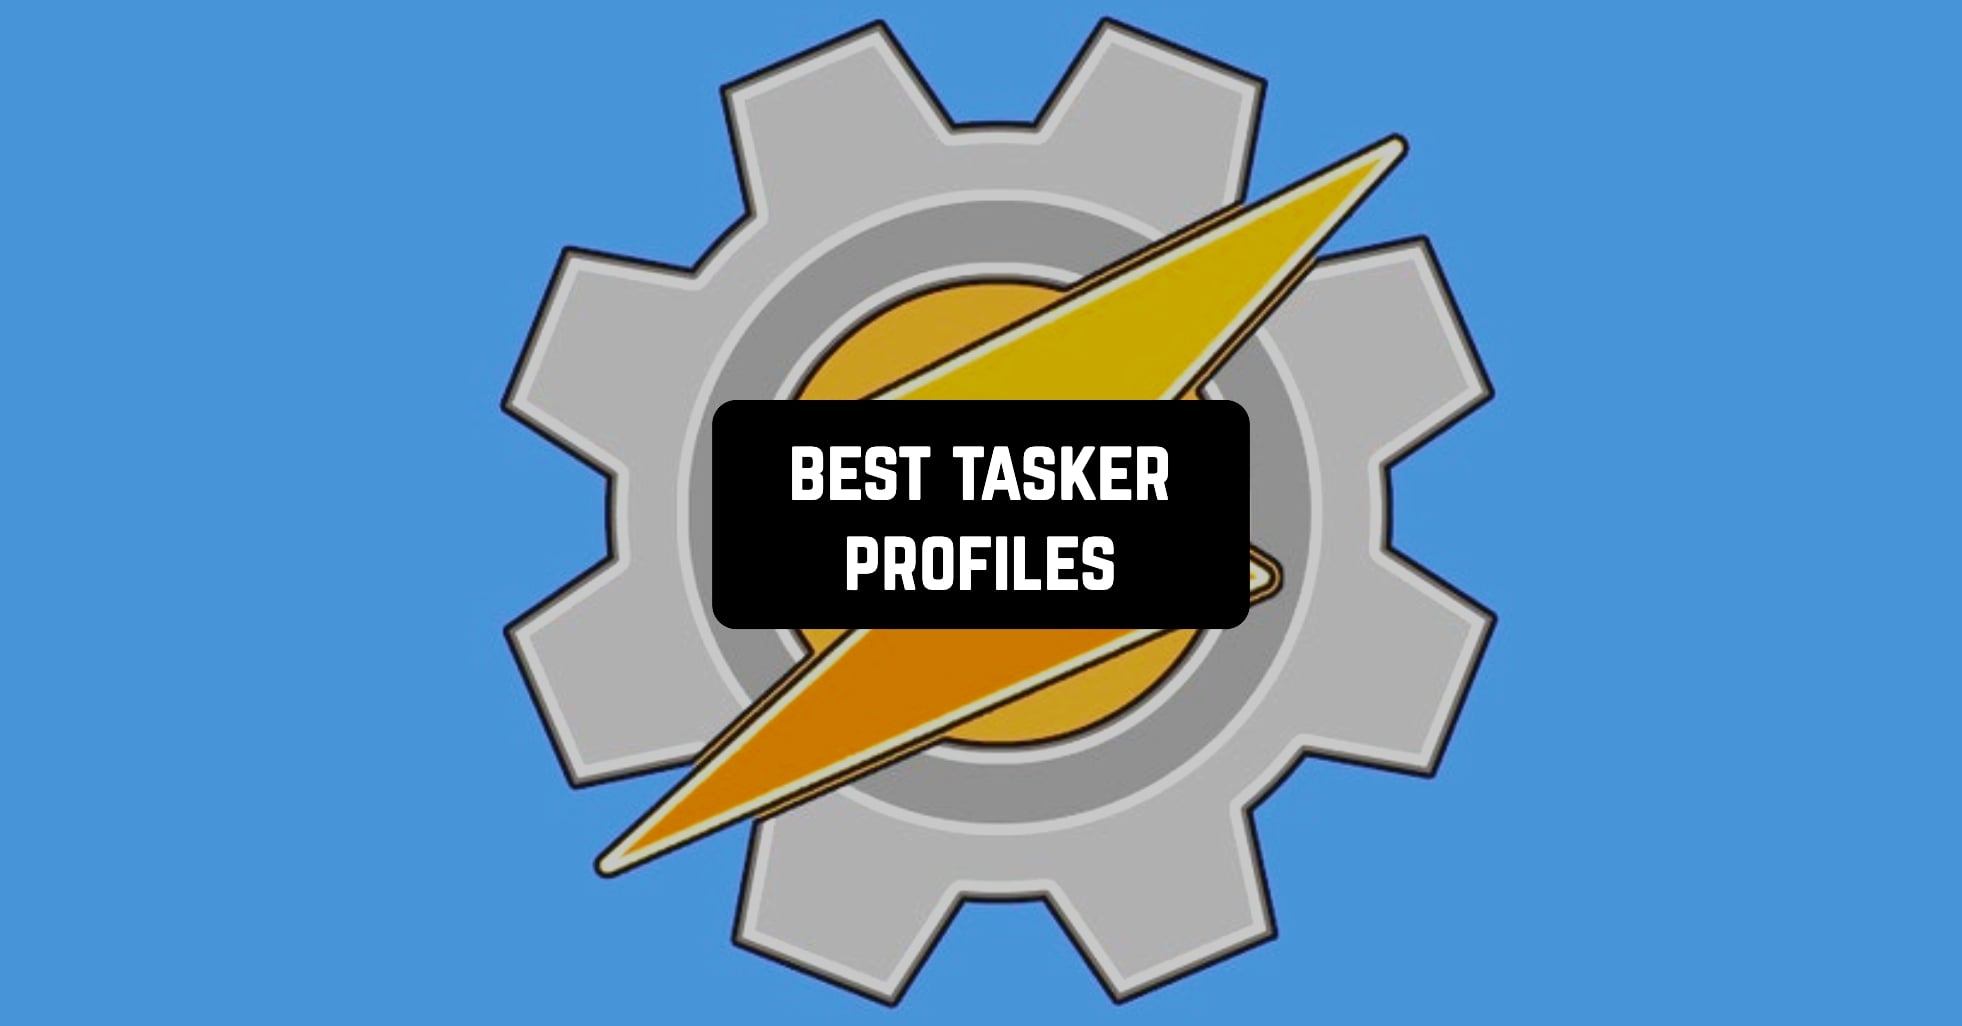 41 Best Tasker Profiles 2023 | apps for Android and iOS